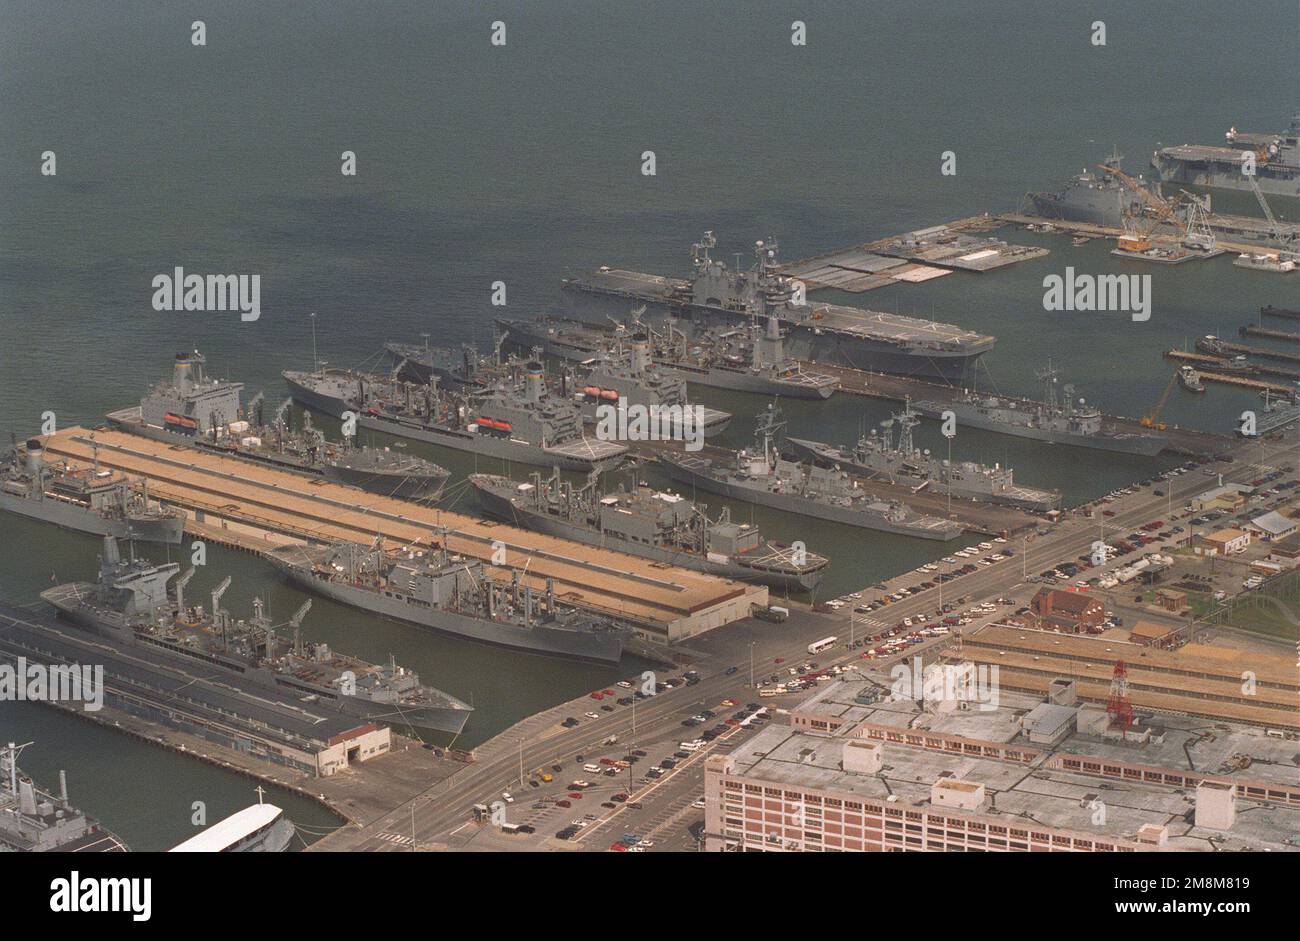 An aerial view of a section of the Norfolk Naval Base with the Defense  Supply Facility in the lower right corner. Tied up at piers #3 through #6  is a vast array